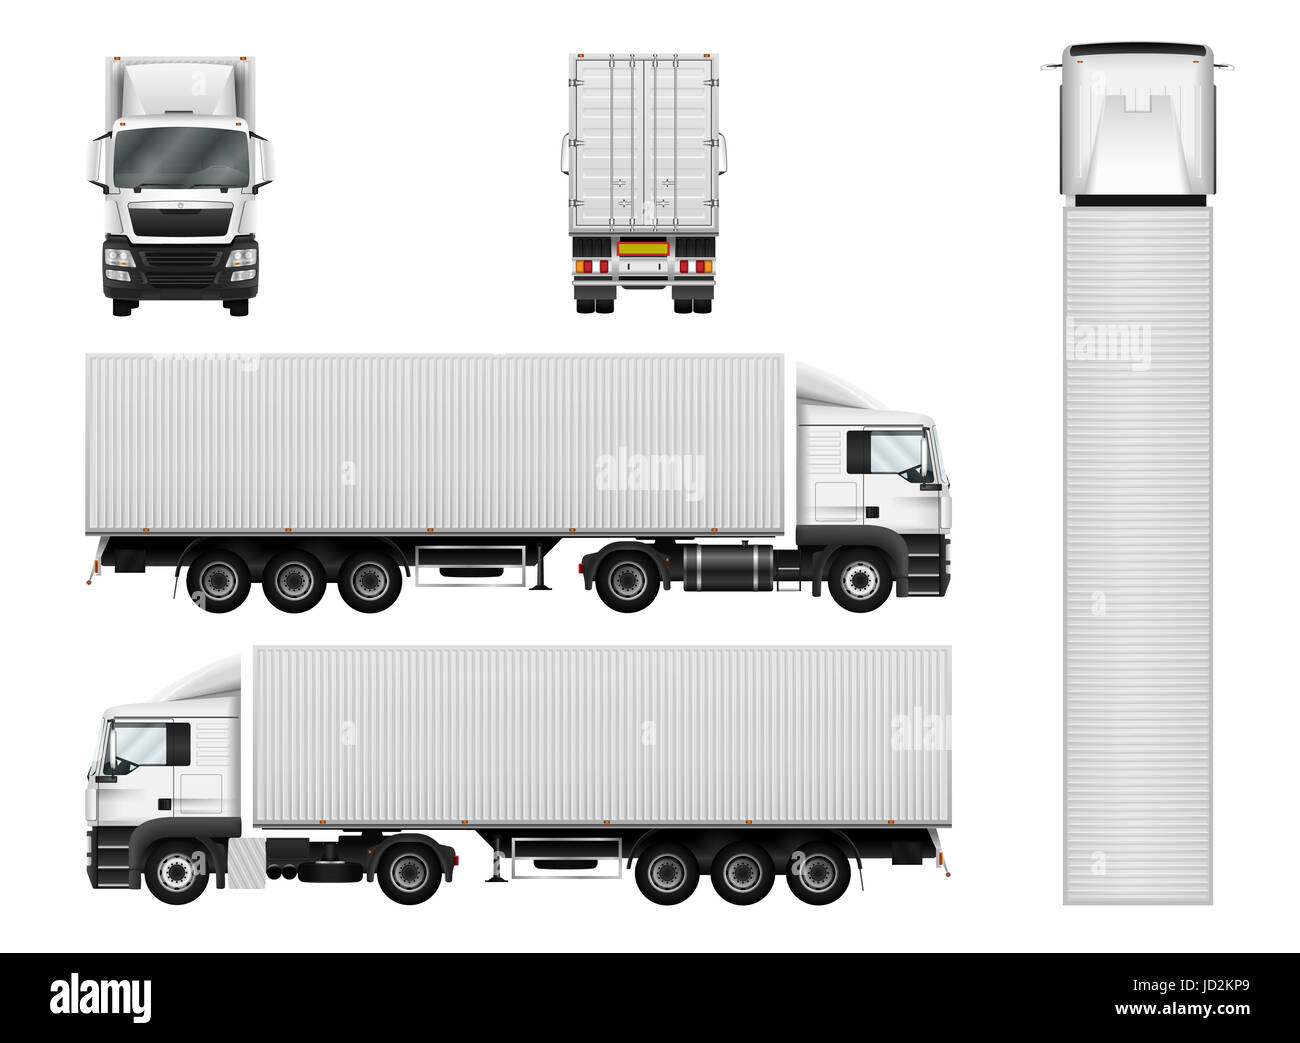 Truck trailer with container. Semi truck illustration on white background. Stock Photo